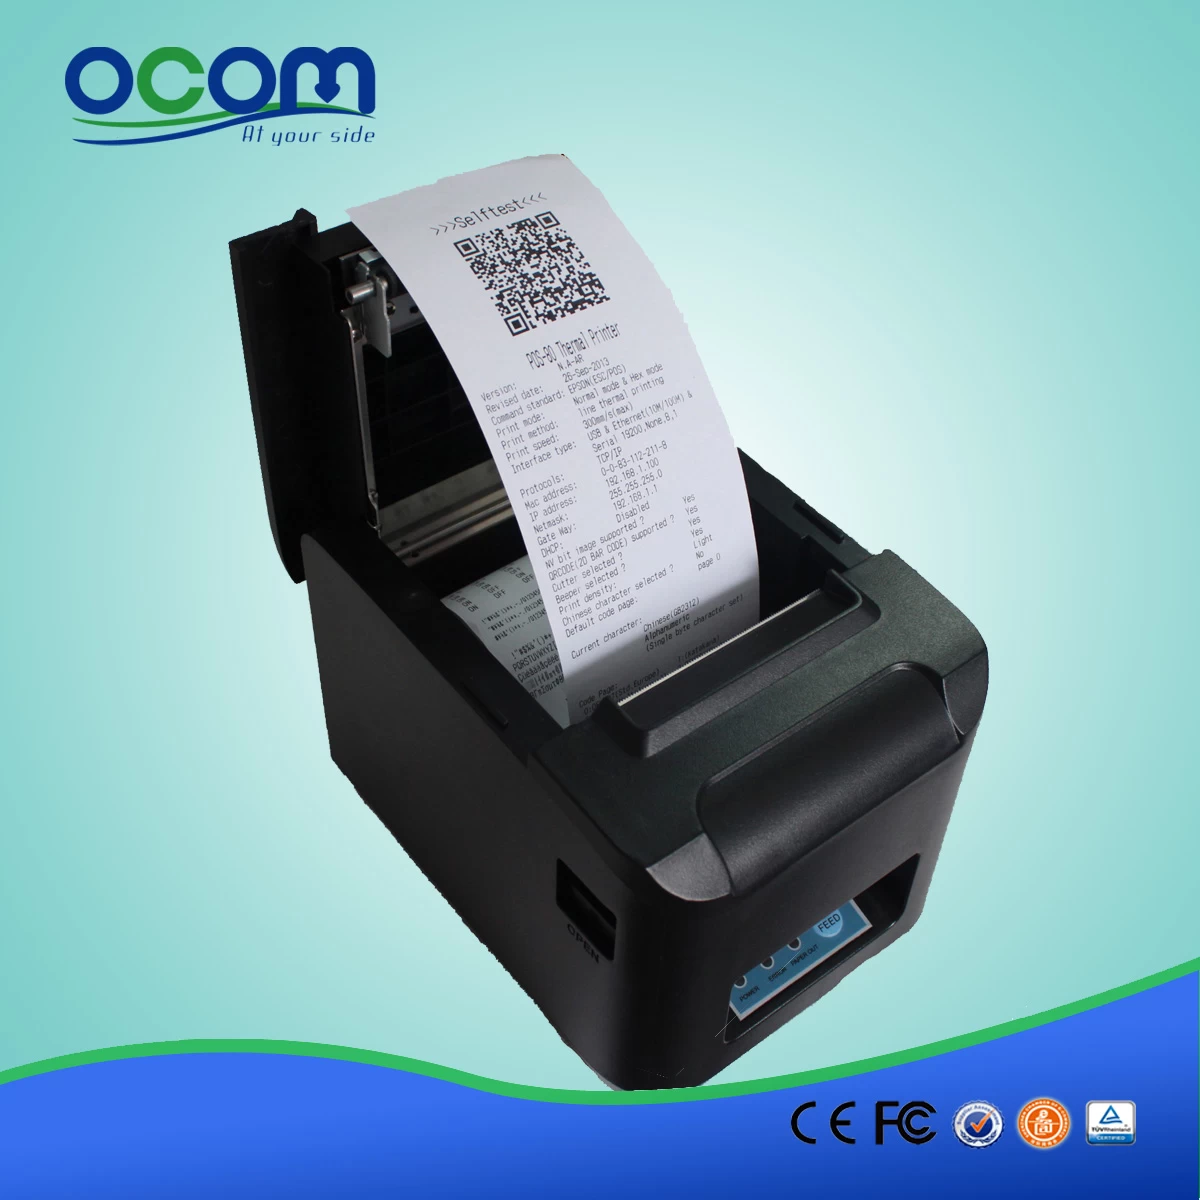 80mm Android Thermal Printer Pos Printer compatible with ESC/POS command